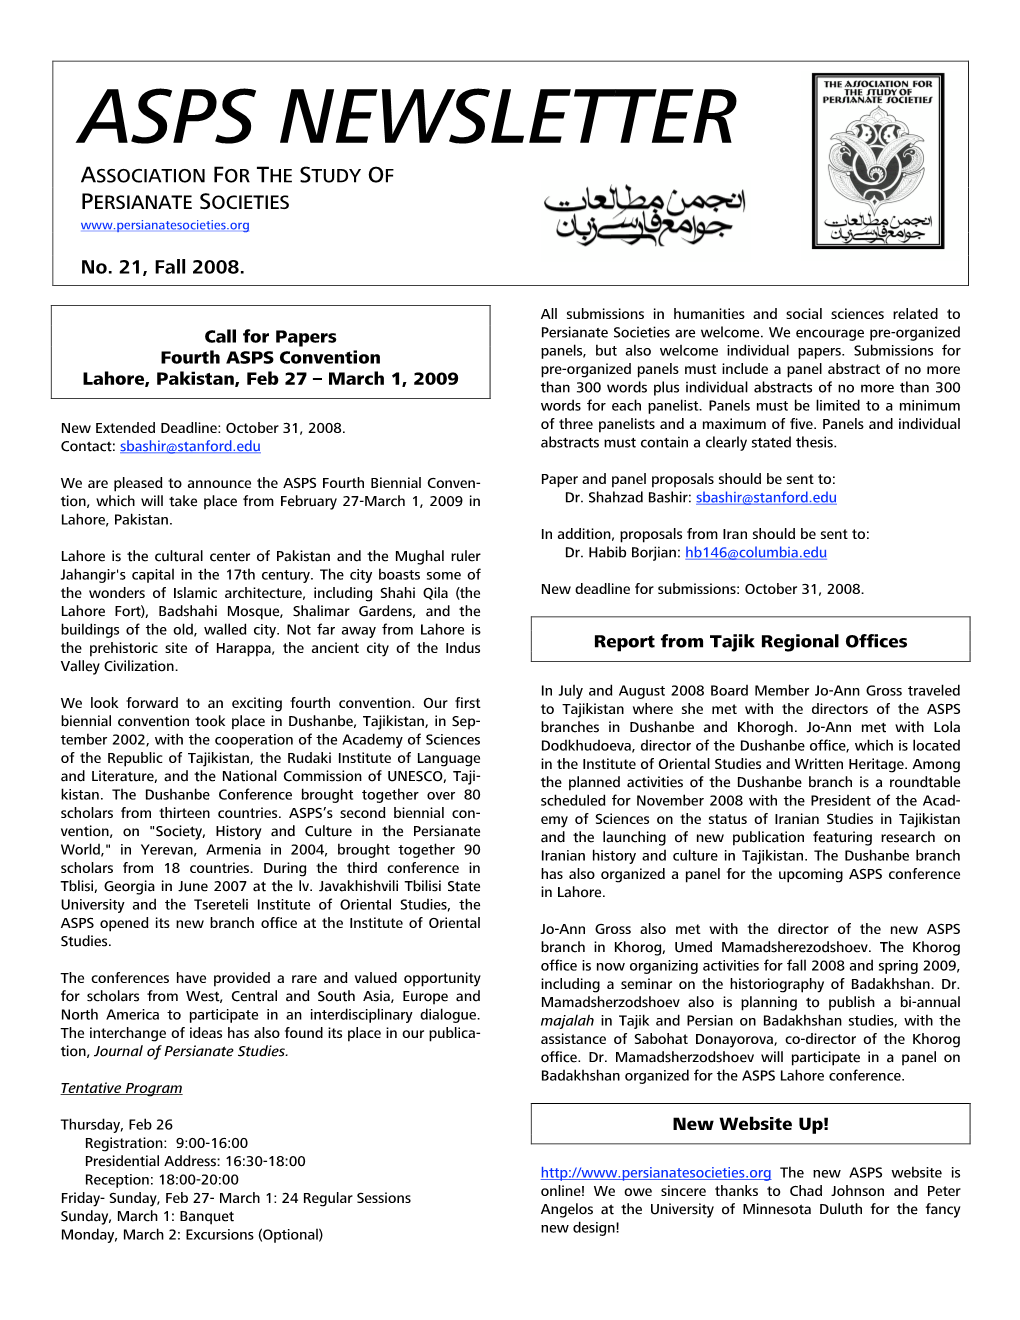 Asps Newsletter Association for the Study of Persianate Societies